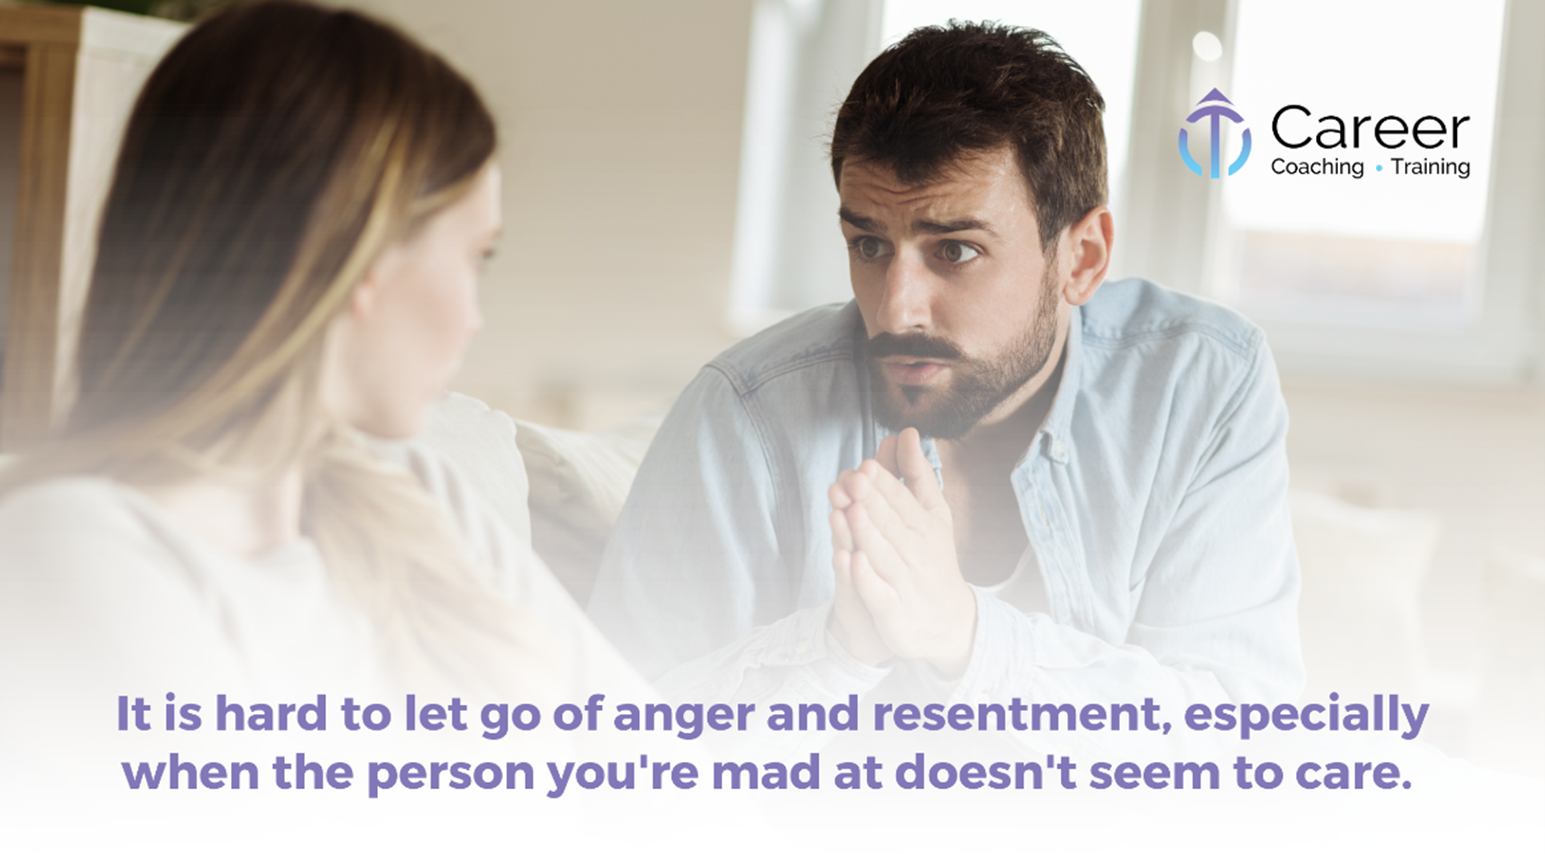 It is hard to let go of anger and resentment, especially when the person you're mad at doesn't seem to care.